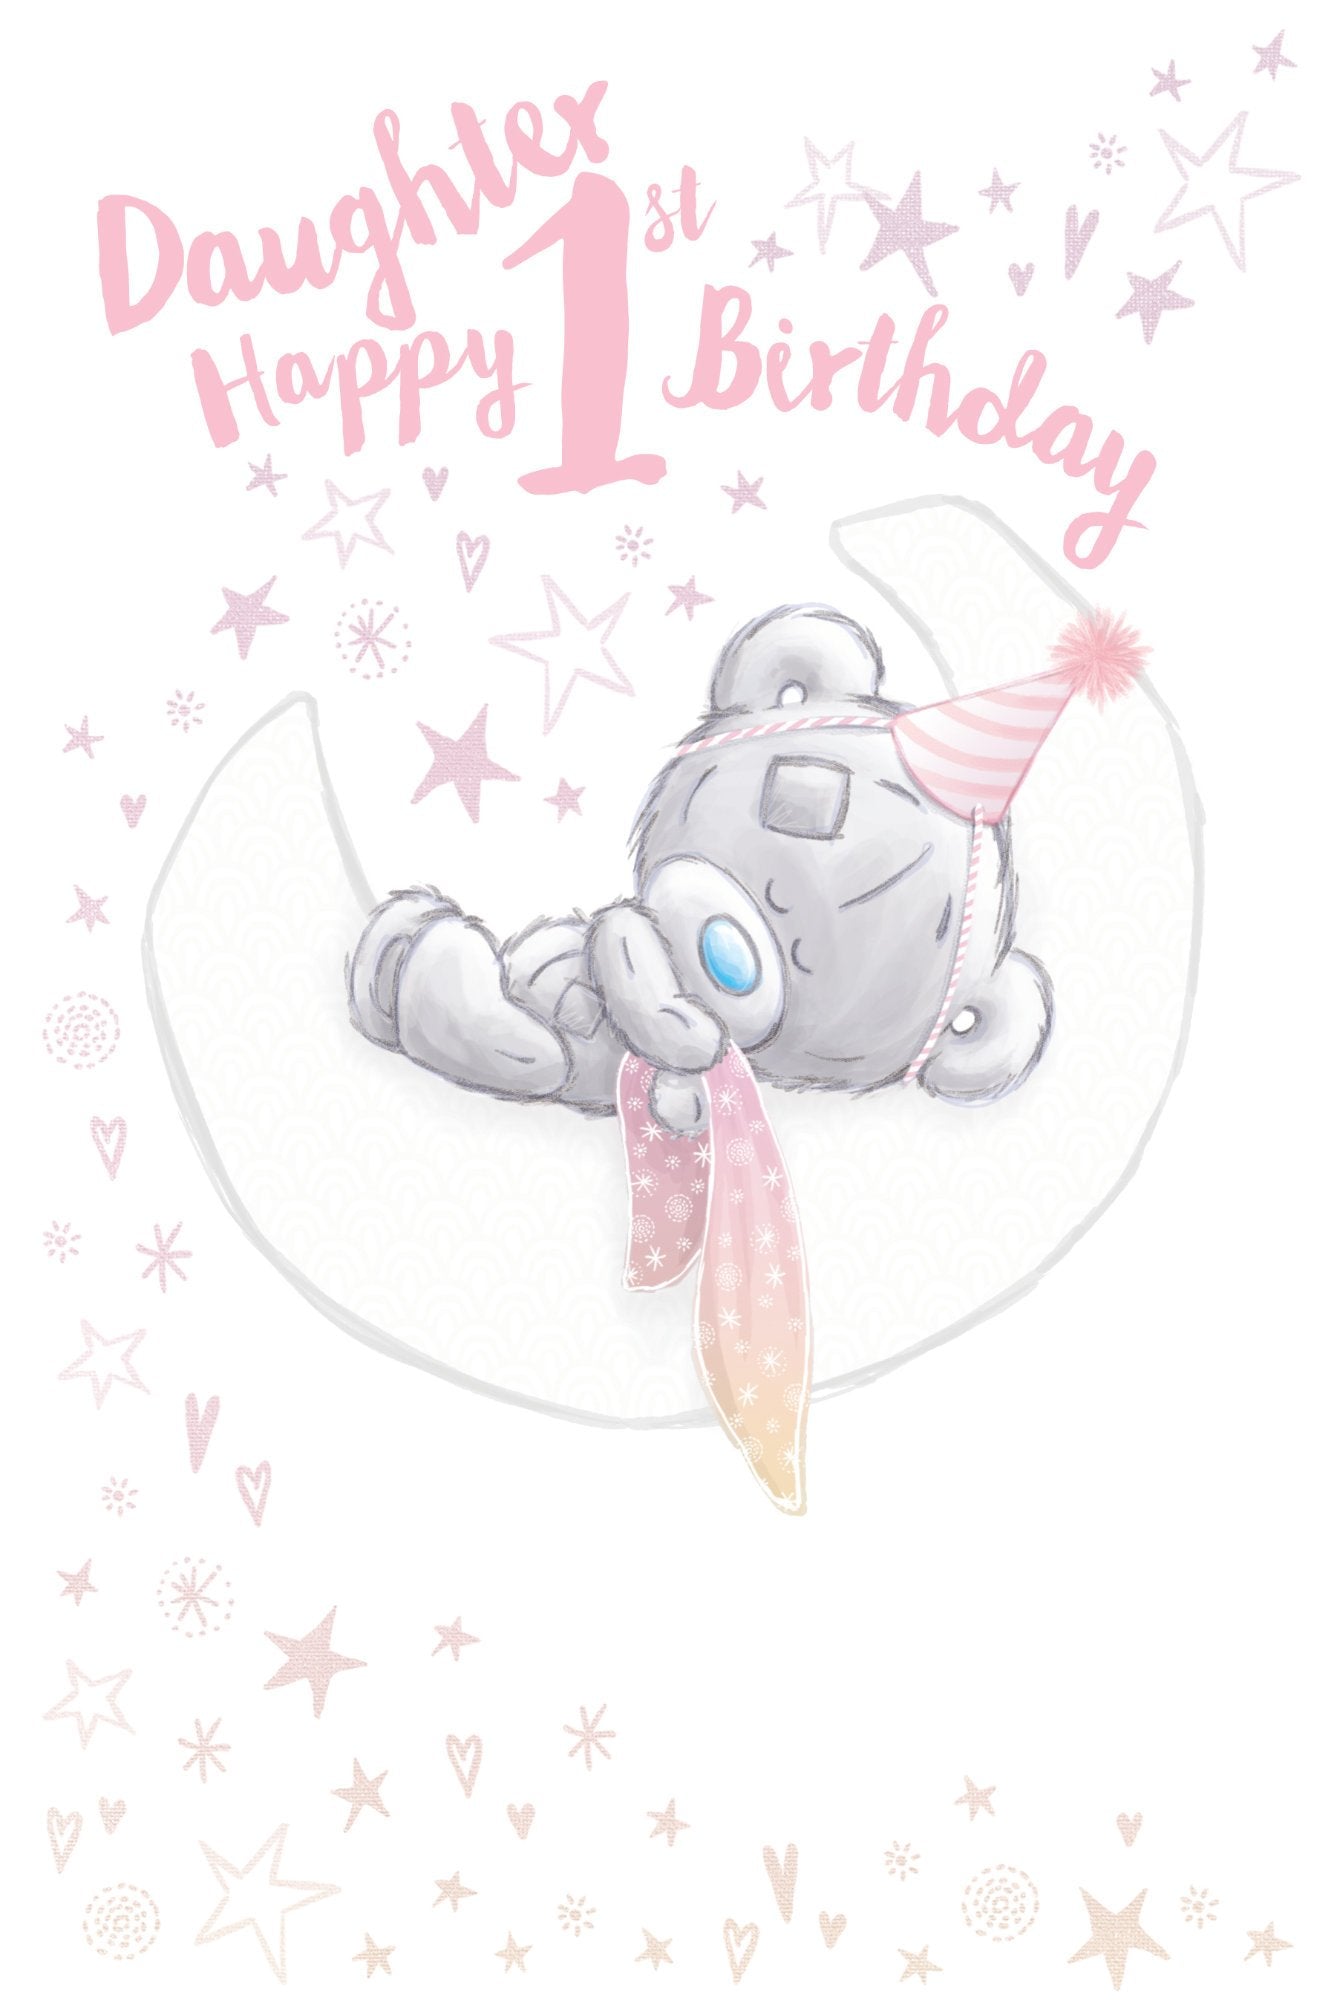 Photograph of Daughter 1st Birthday Teddy Moon Greetings Card at Nicole's Shop